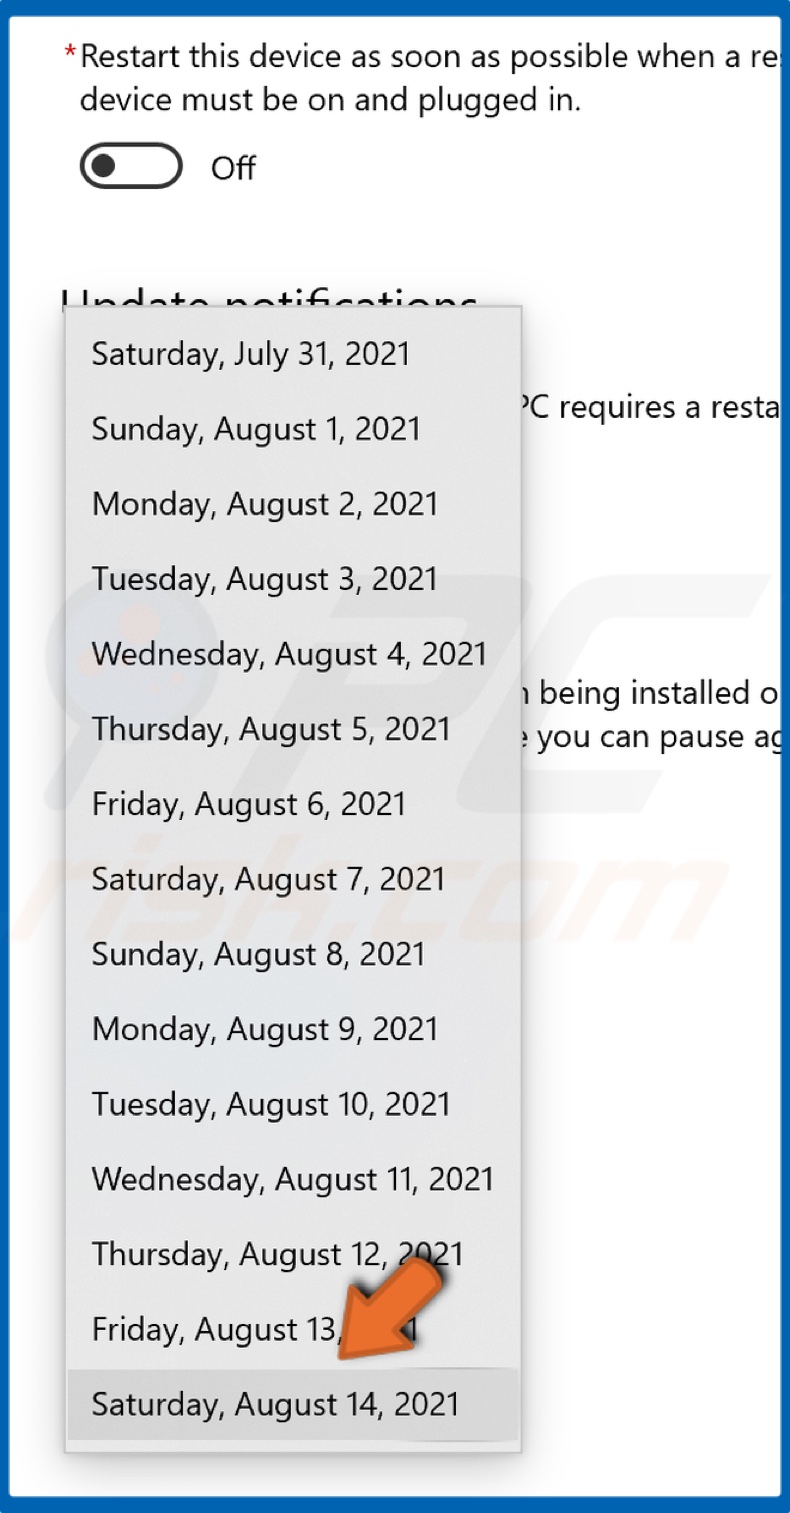 Select the furthest available date